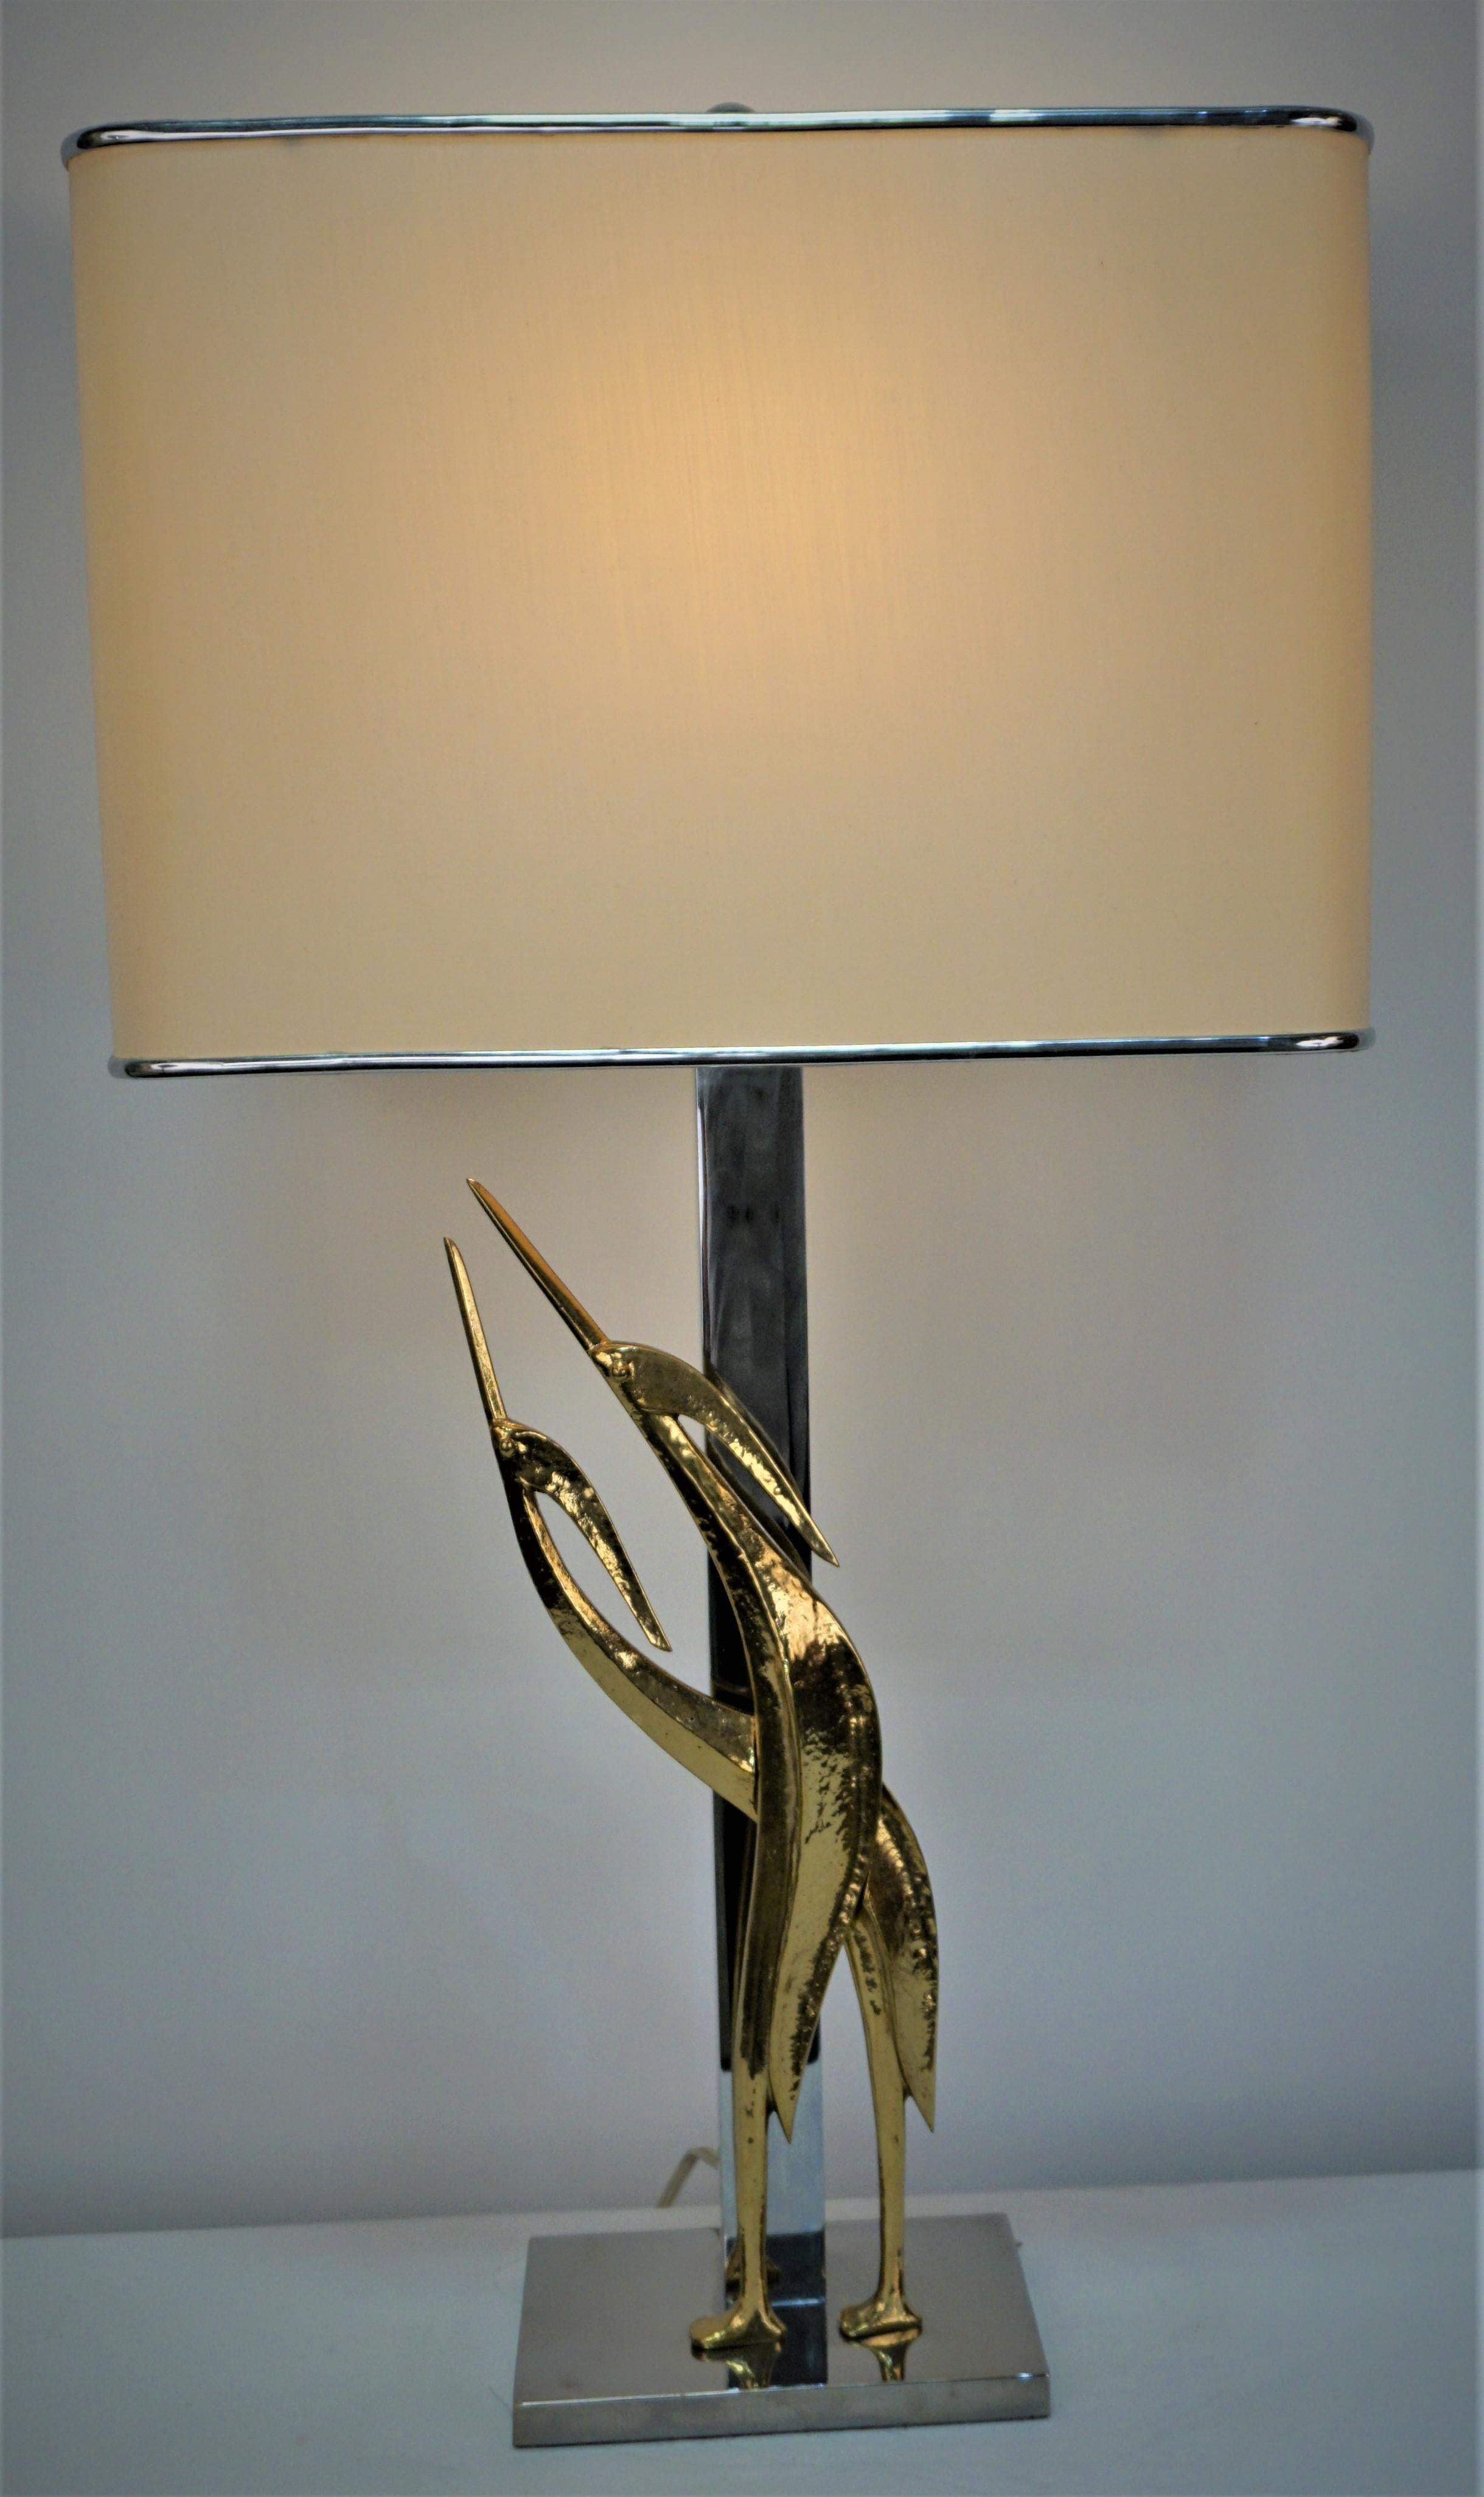 Polished bronze with nickel on bronze base table lamp with custom made silk lampshade.
Measurement include the lampshade.